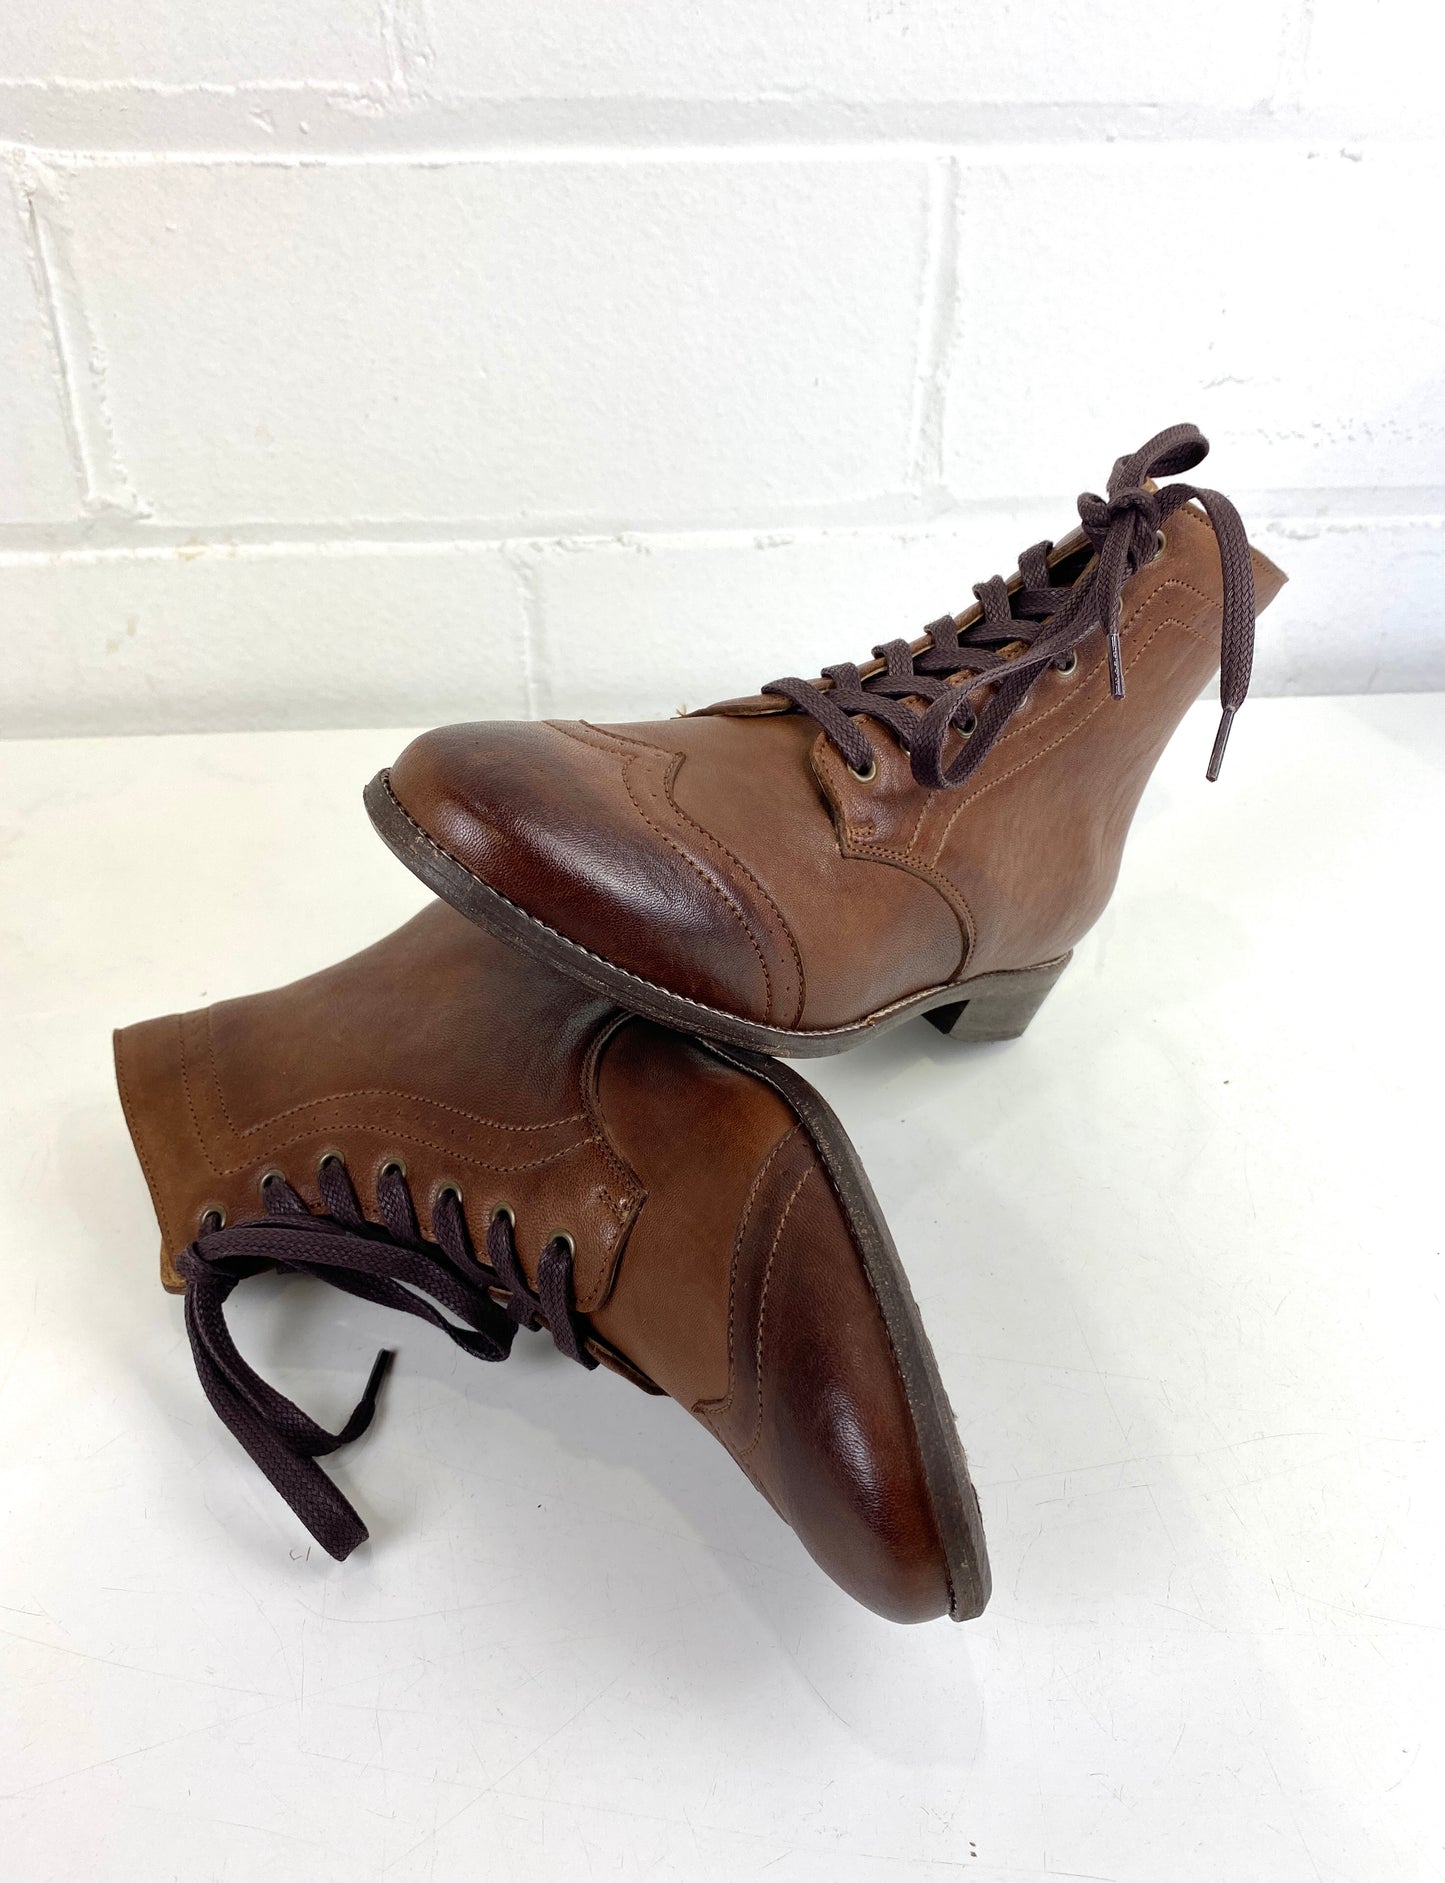 Boys' Period Repro Brown Leather Wingtip Brogue Boots, Made in Portugal